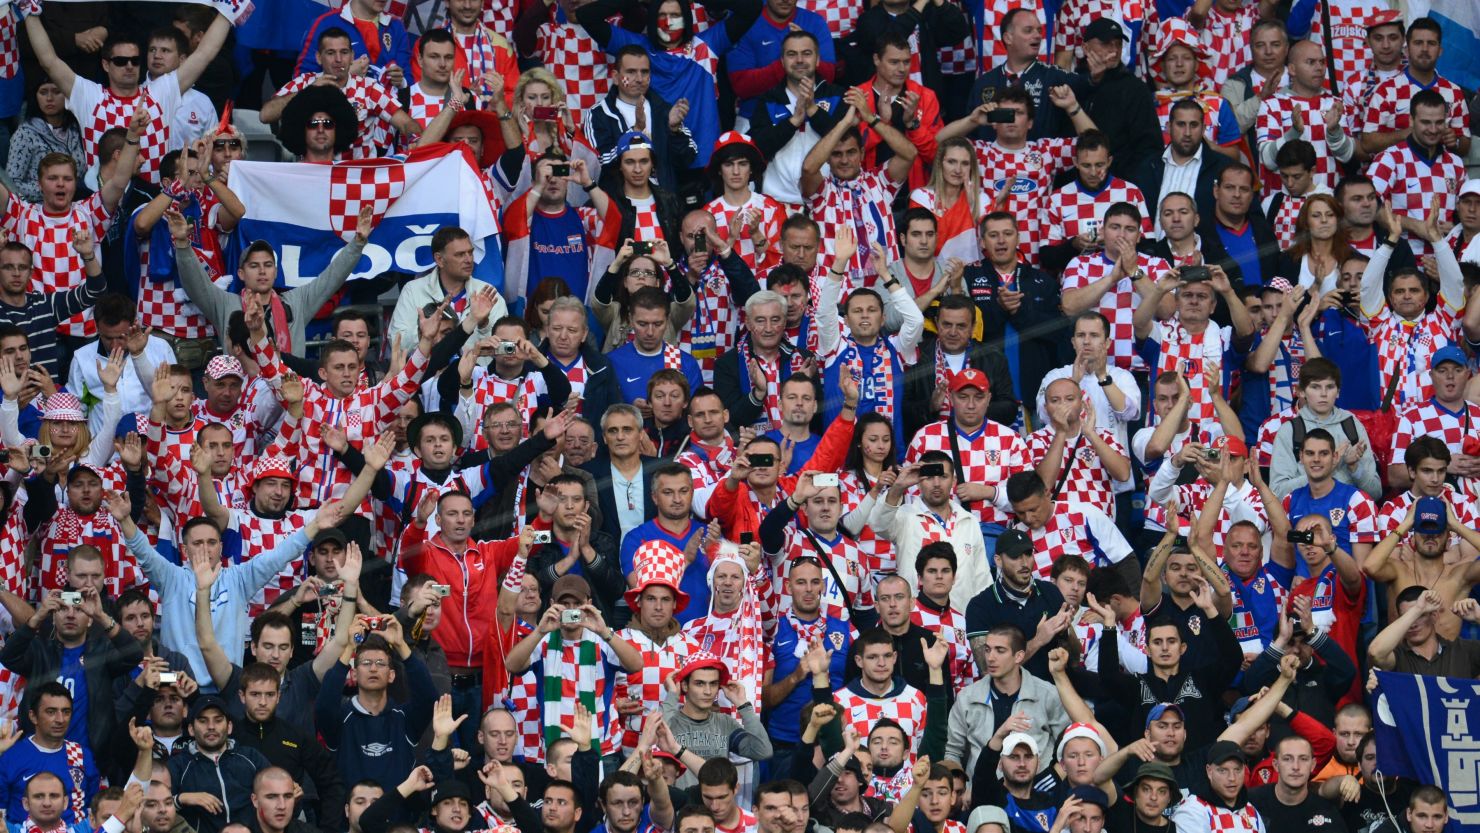 Croatia supporters at the Euro 2012 match against Italy in Poznan on June 14.